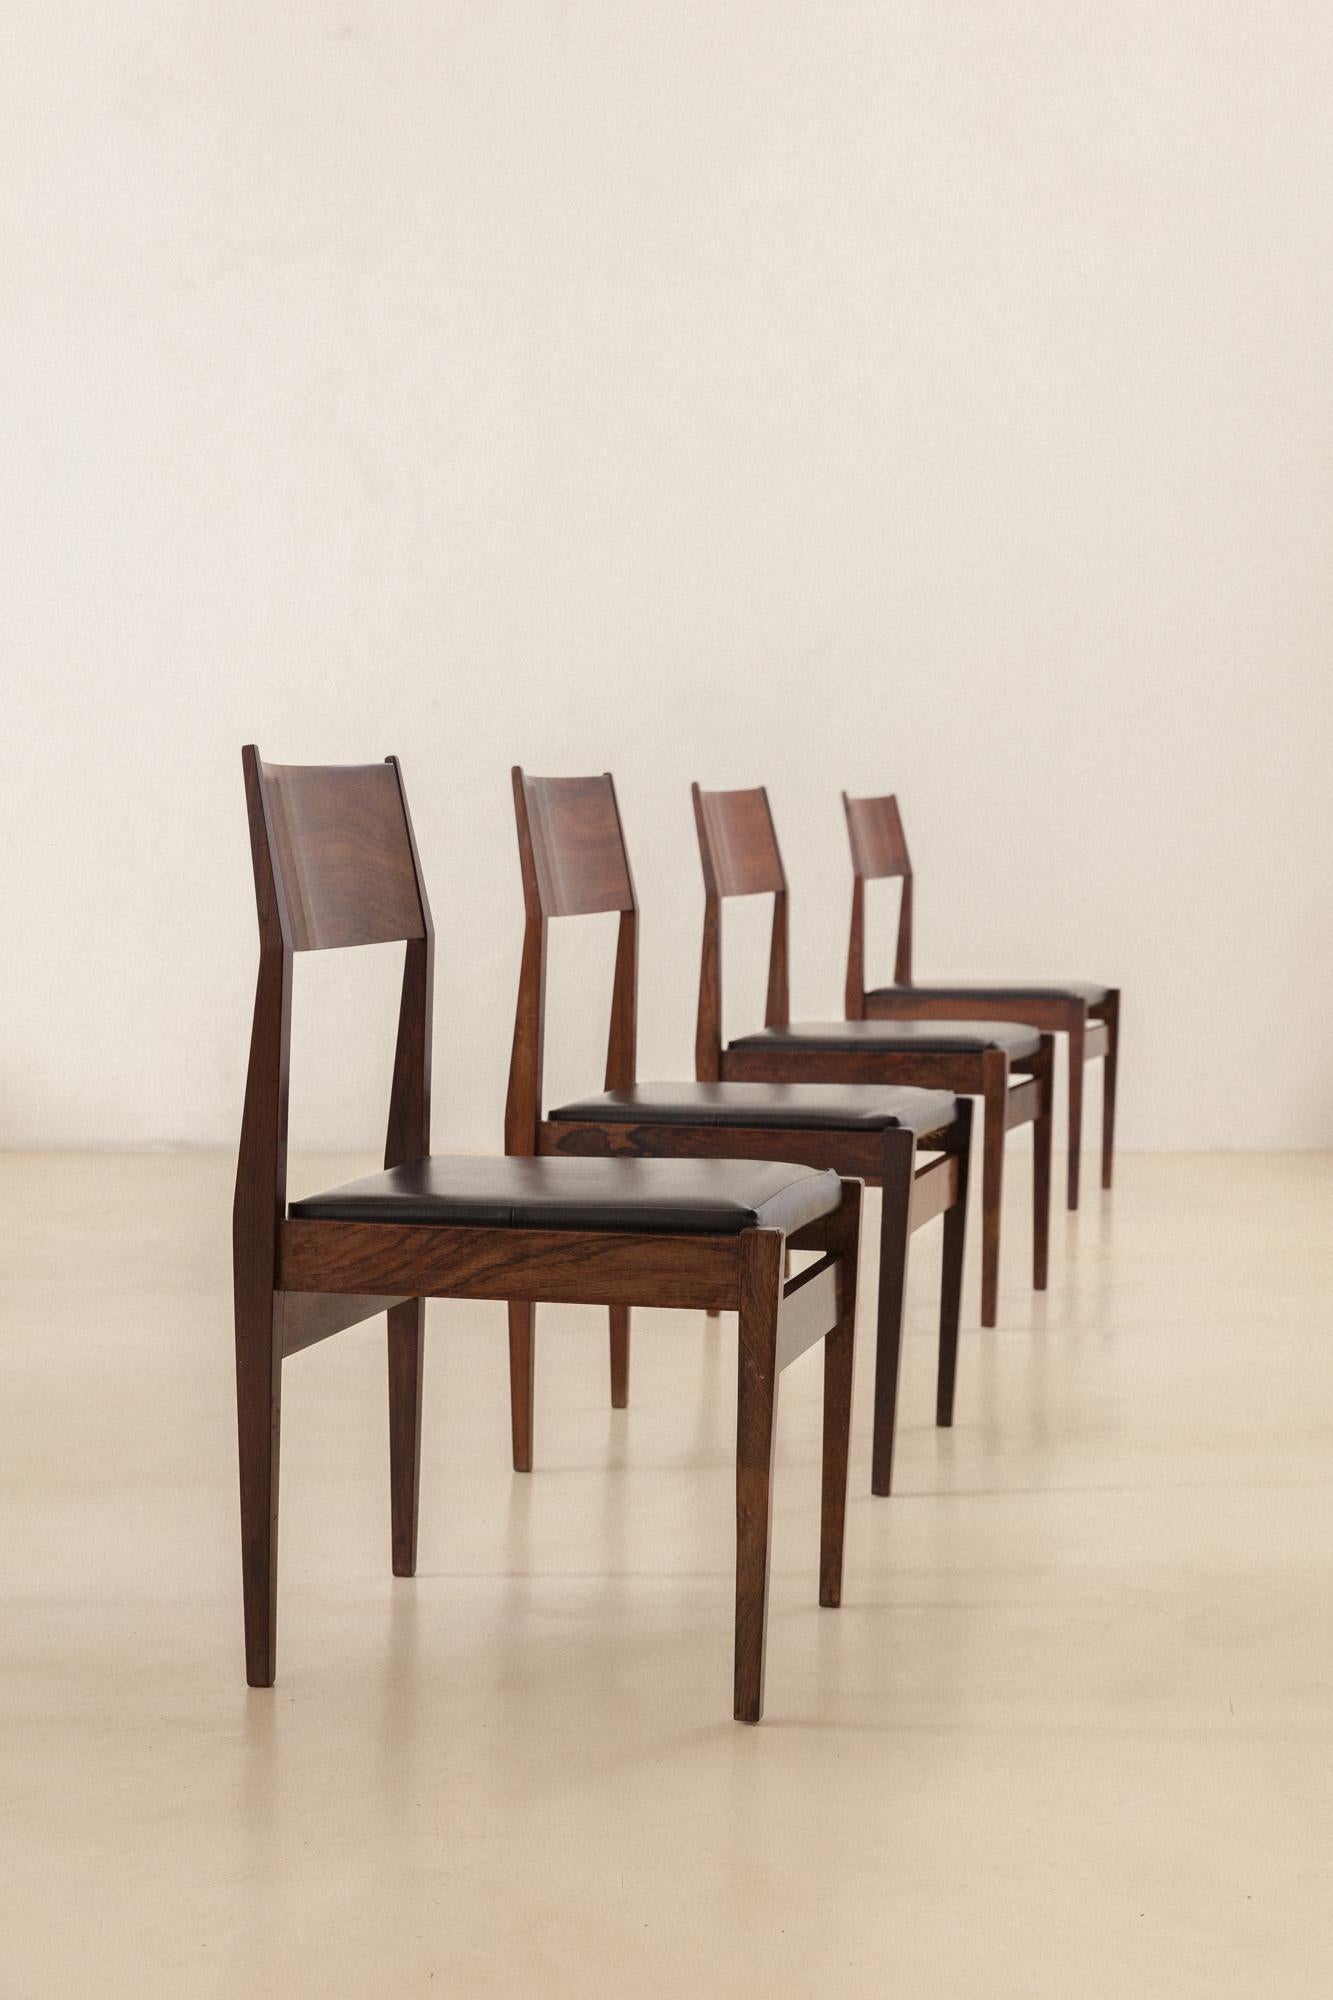 These chairs are made of Rosewood with leather seats and were produced c. 1960 by iadê. The pieces present rectangular profiles of solid Rosewood with large and comfortable seats and slightly leaning backrests in beautiful Rosewood veneers. 

iadê